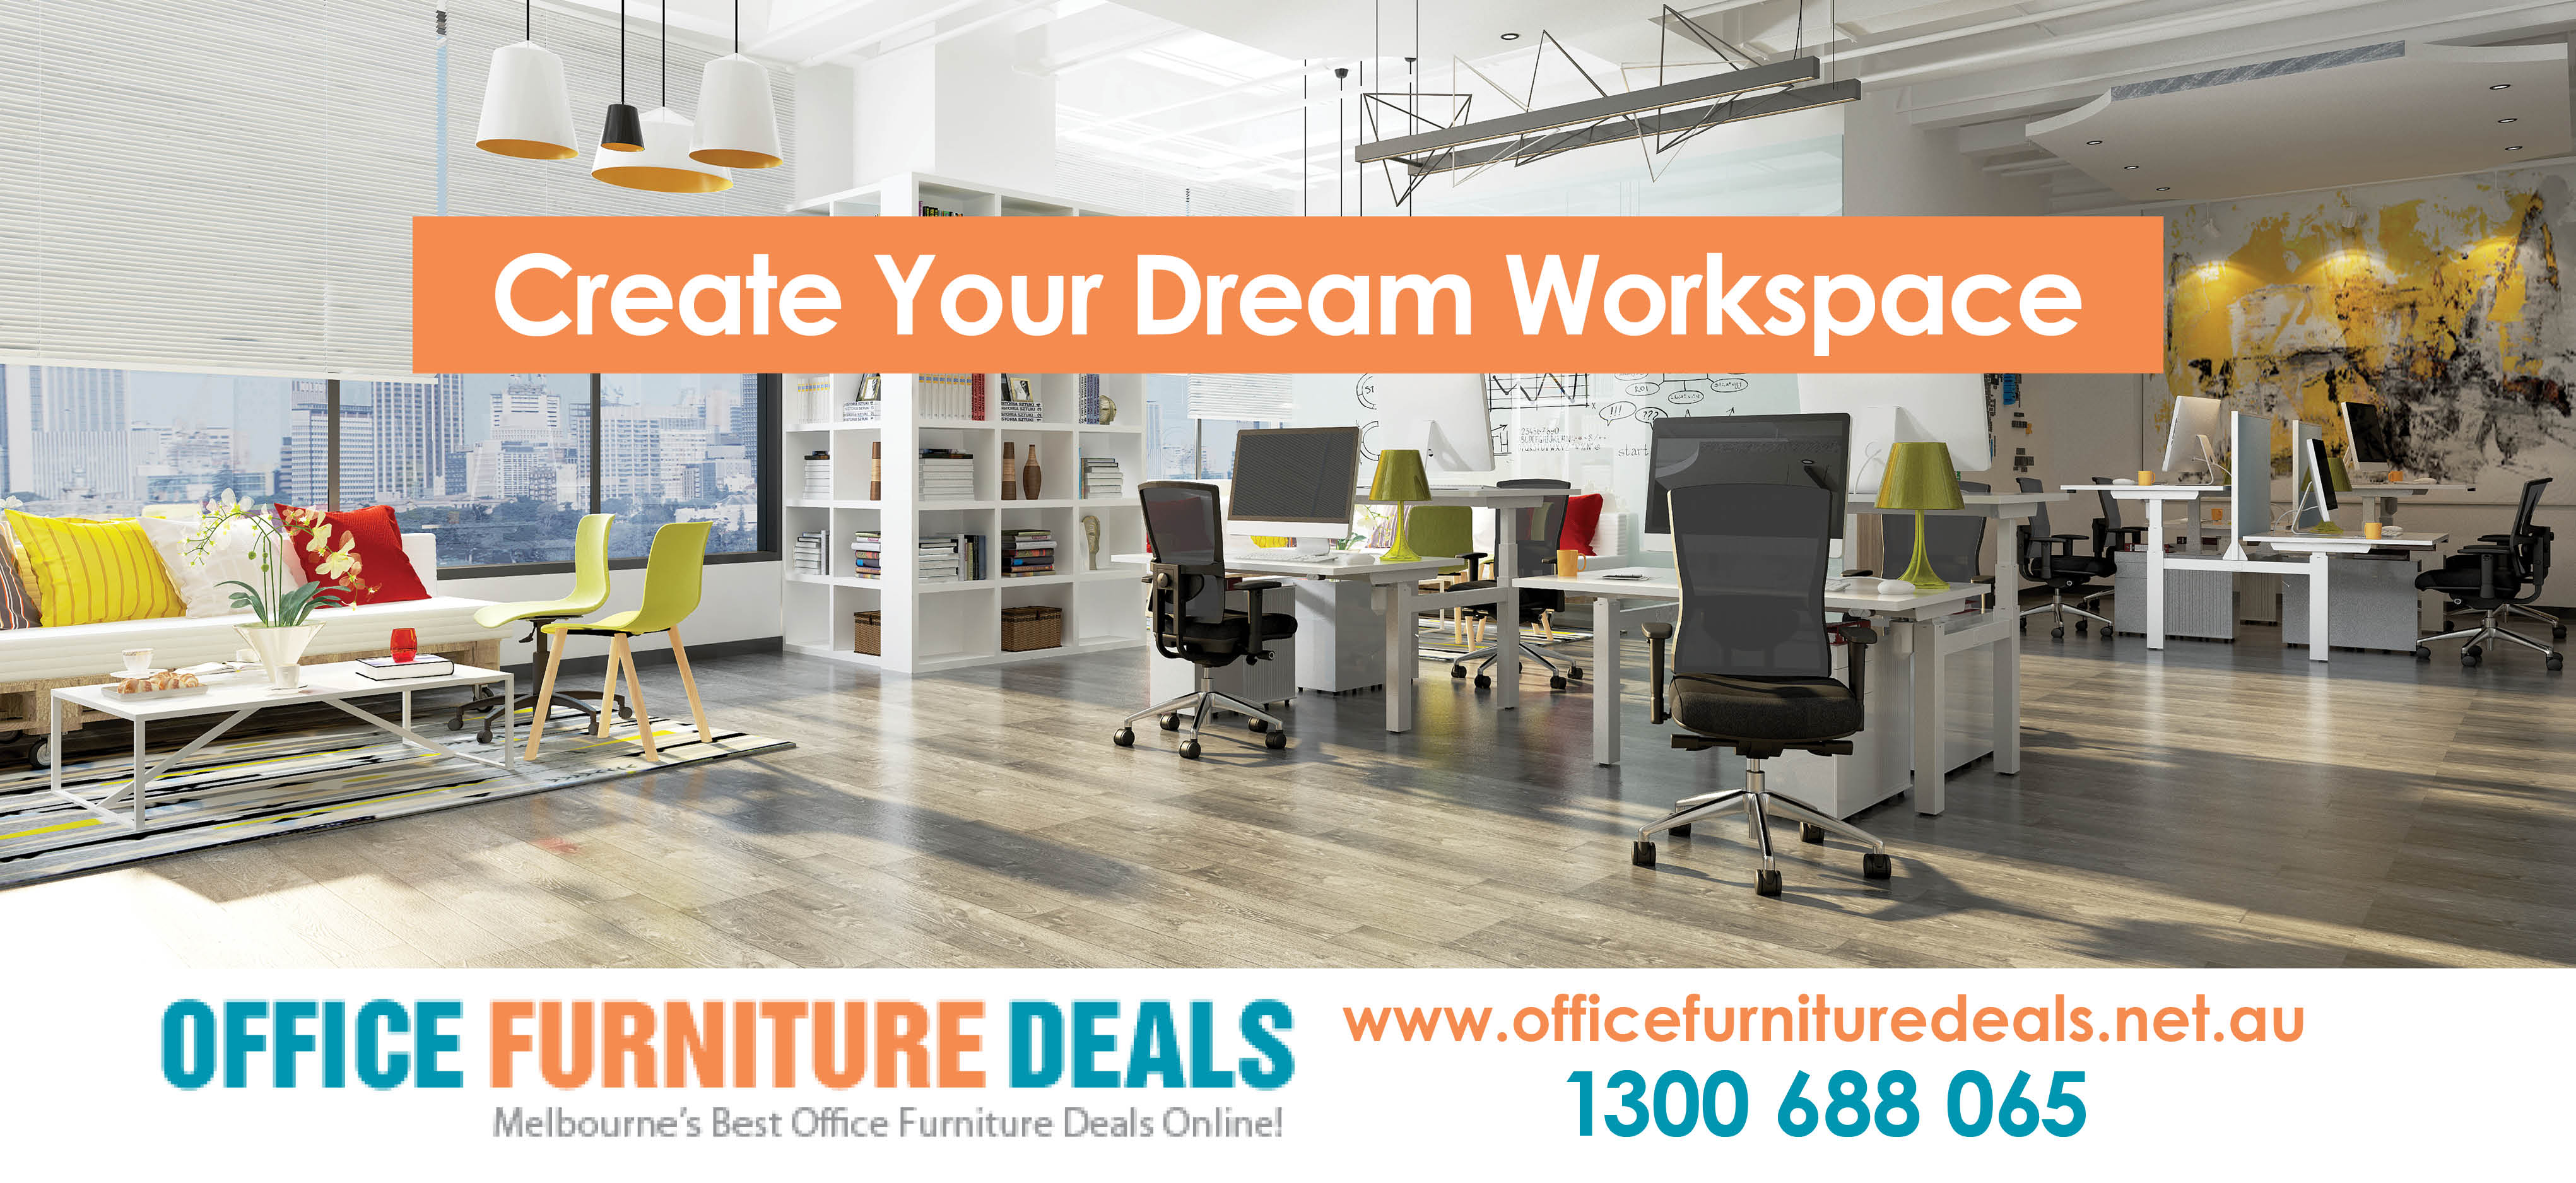 Ways to Save and Find Office Furniture Promo Codes and Deals